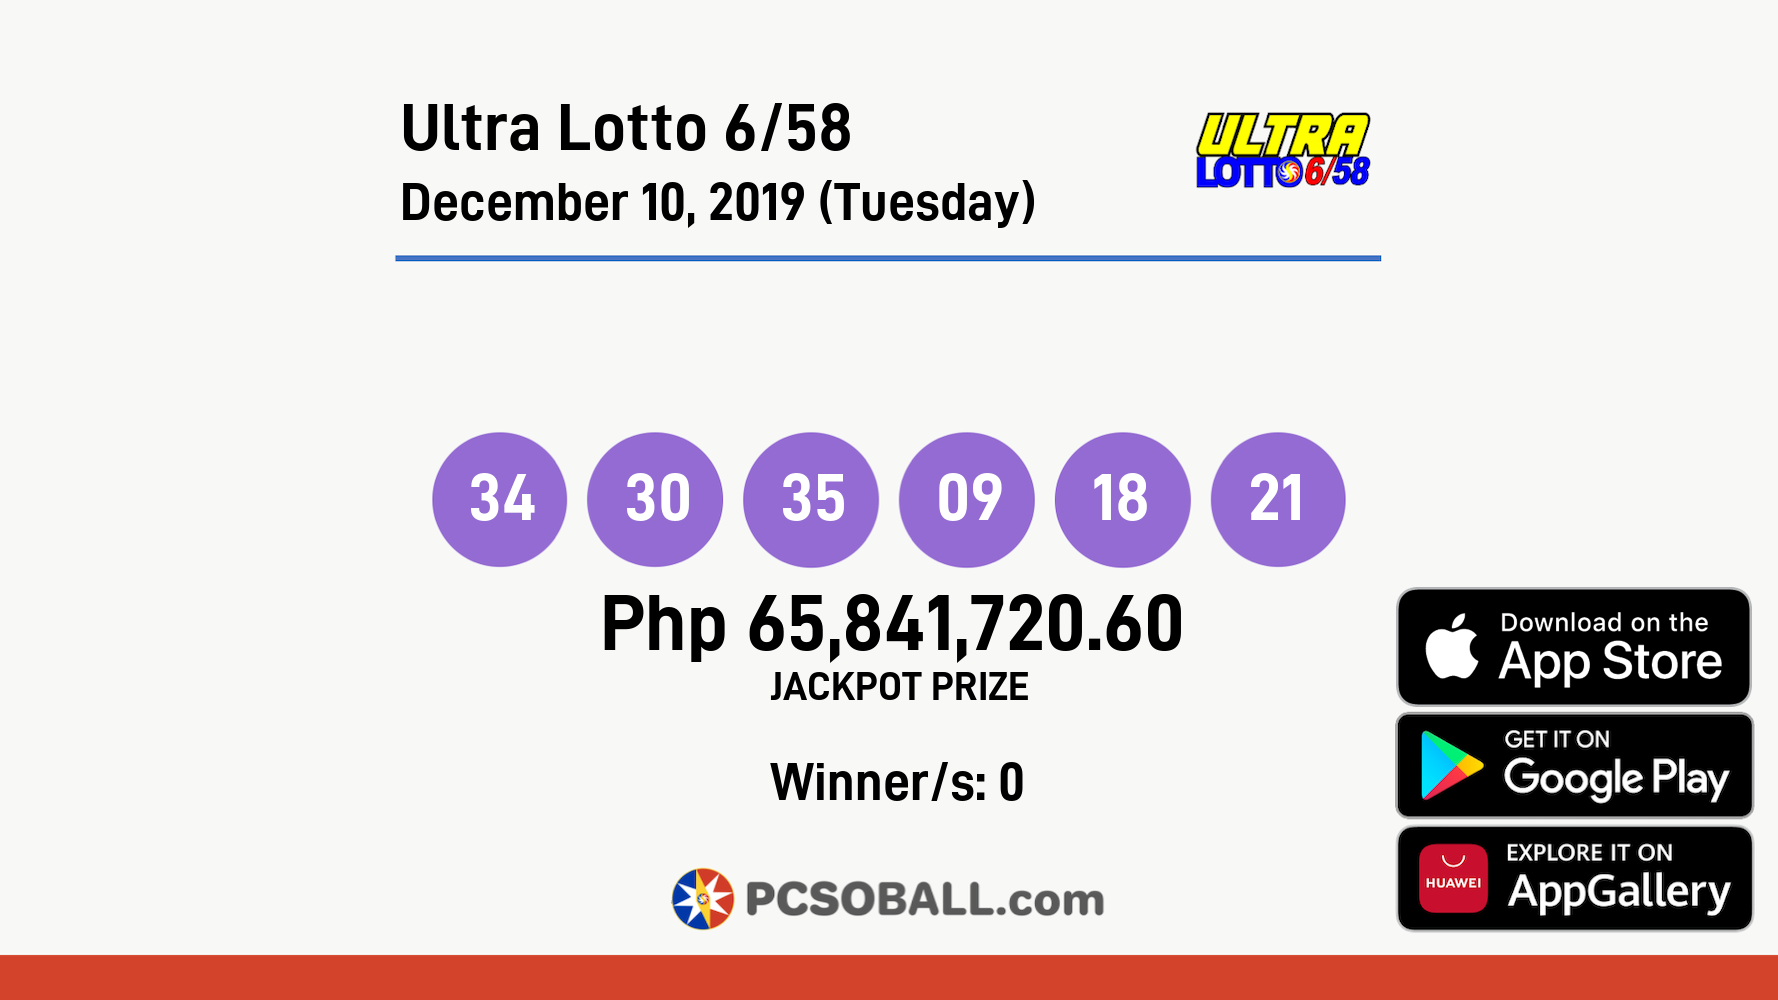 Ultra Lotto 6/58 December 10, 2019 (Tuesday) Result